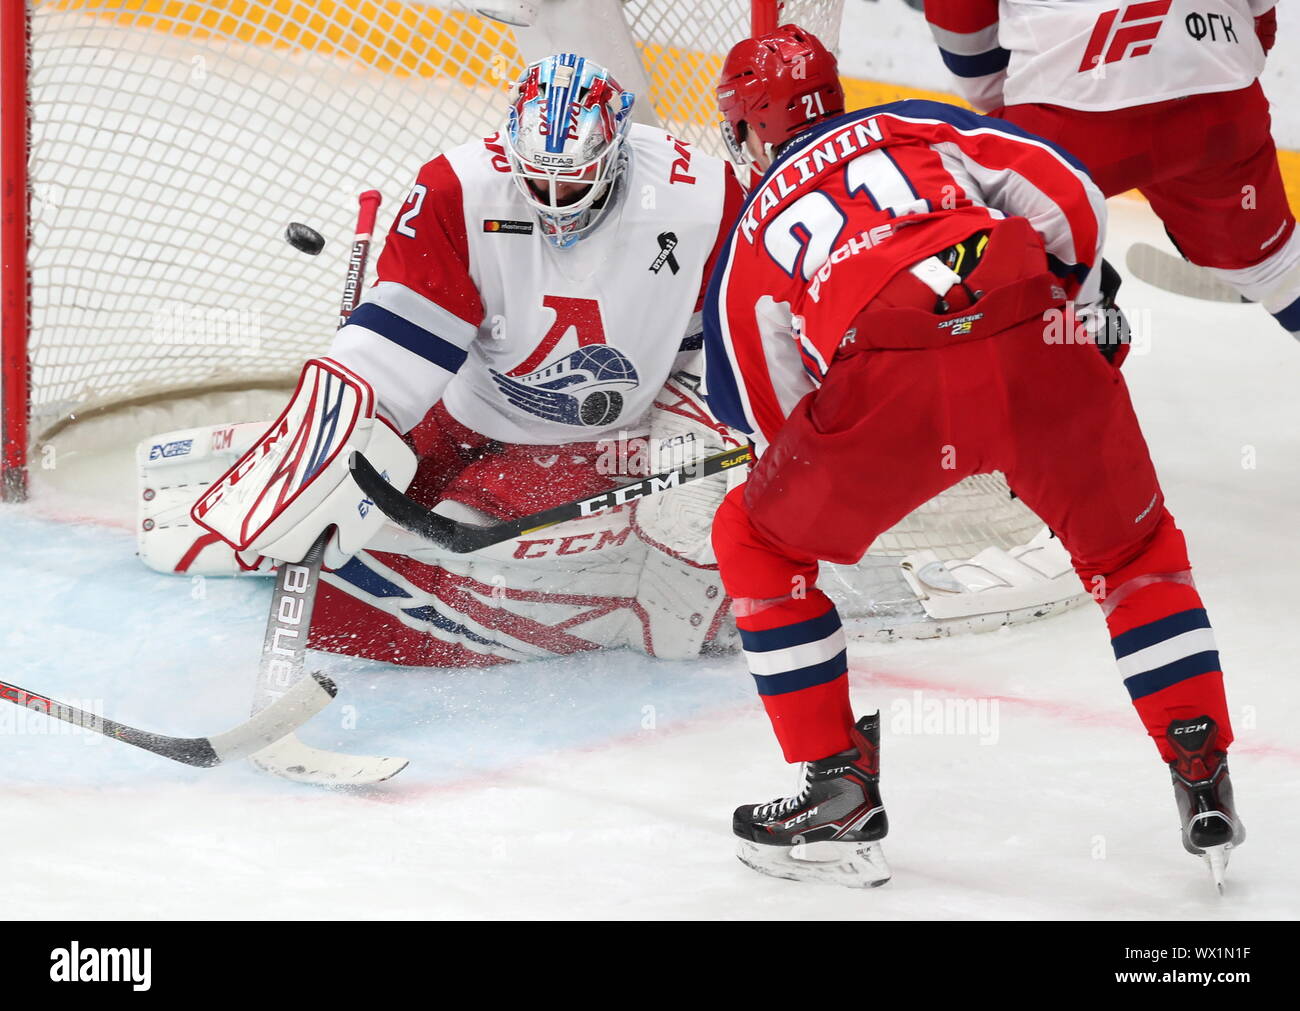 Buy Khl Live Scores UP TO 59% OFF